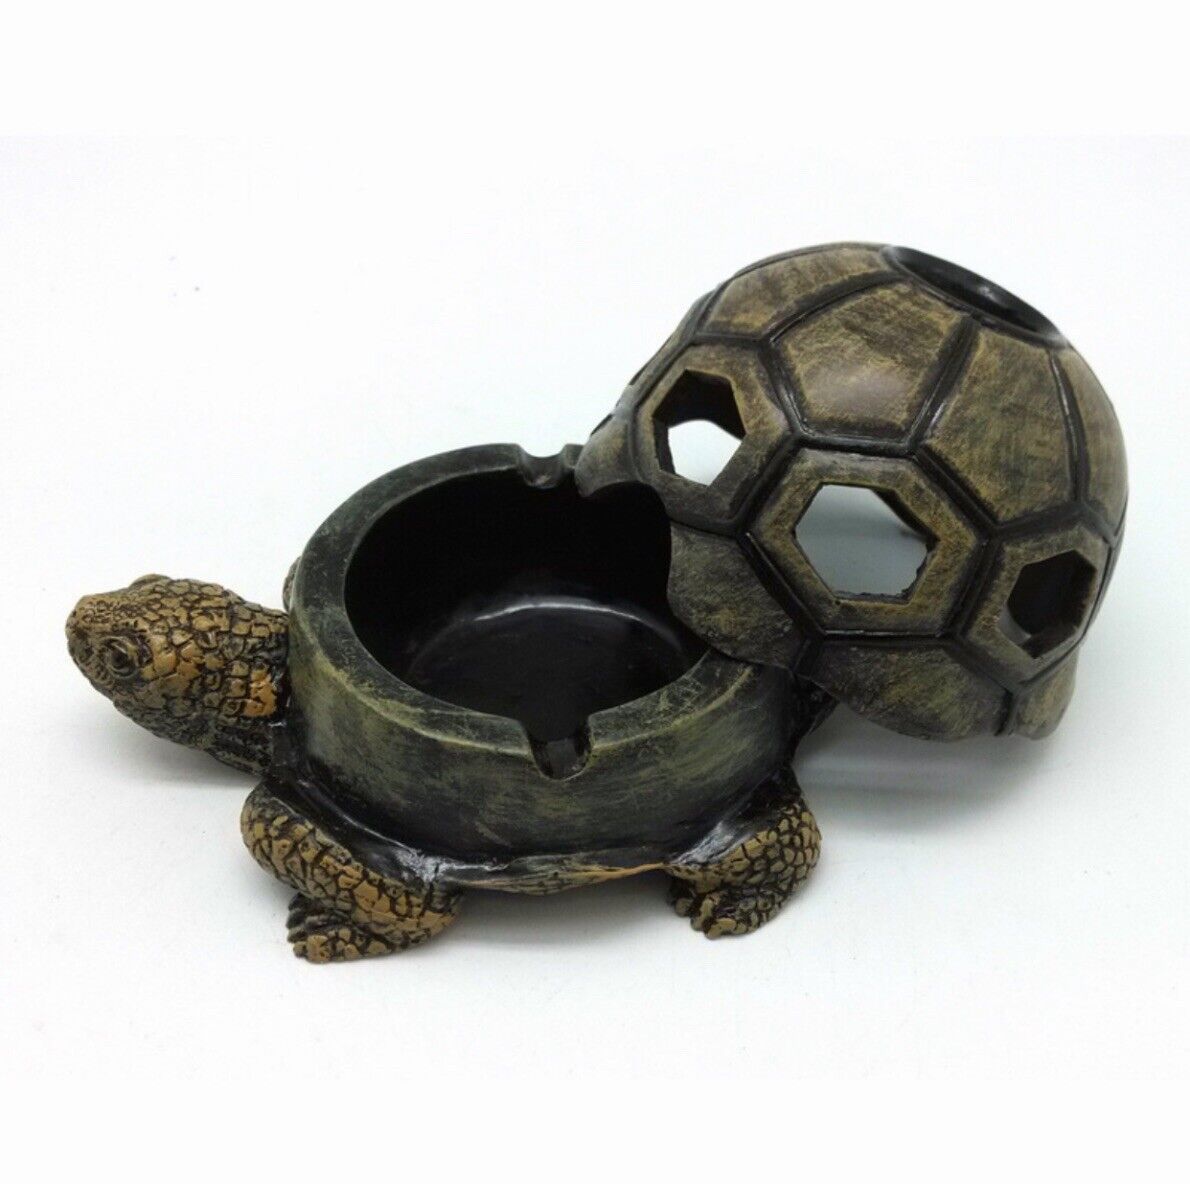 Turtle Ashtrays Cigarettes With Lid,For Outdoor,Indoor,Home,Office